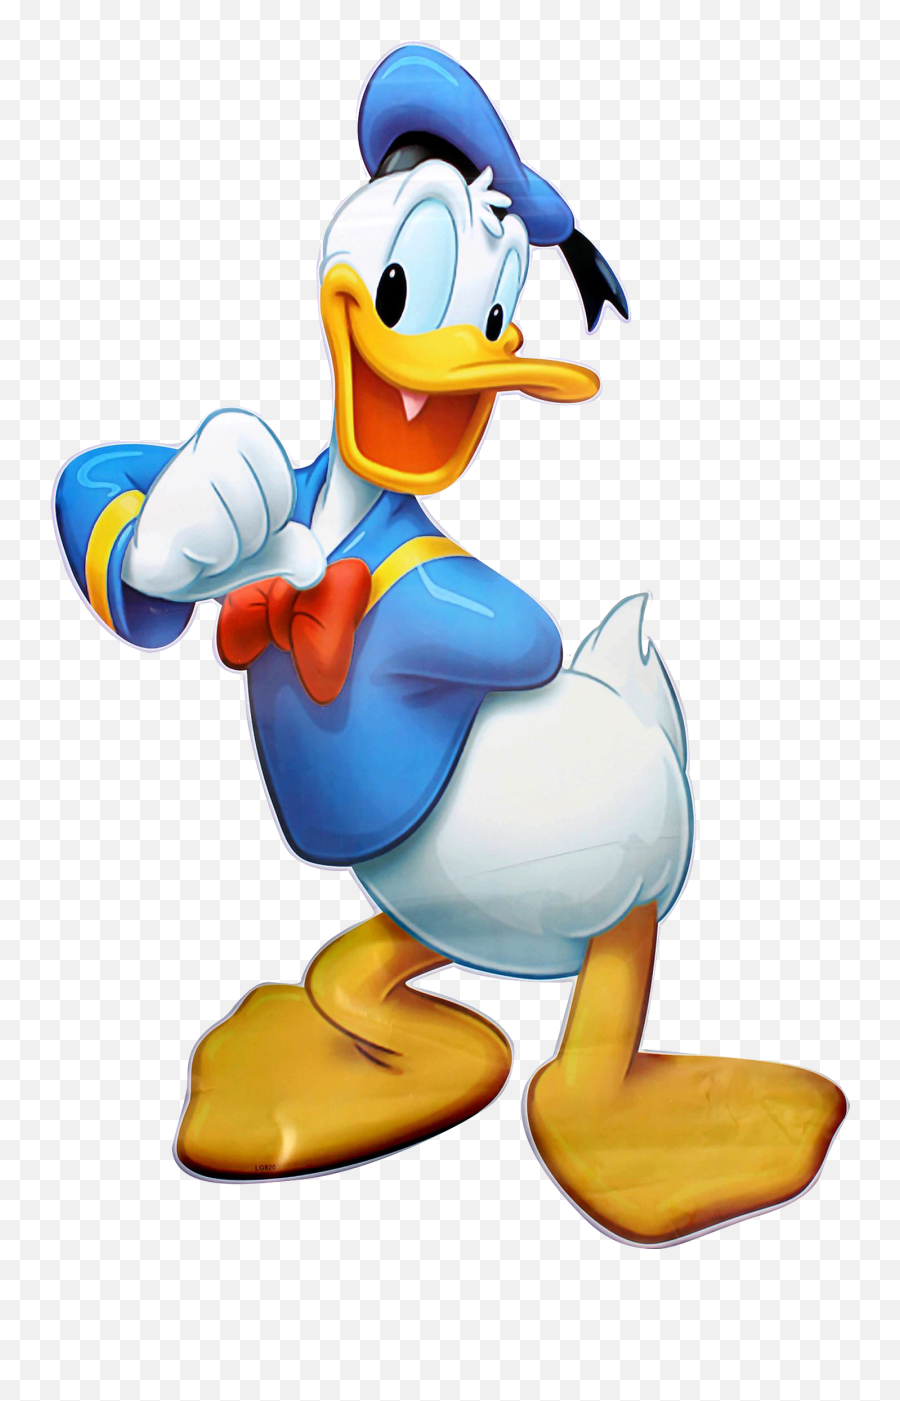 Angry Donald Duck Png Transparent Images - 2457 Transparentpng Donald Duck Emoji,Duck Emoji Whatsapp